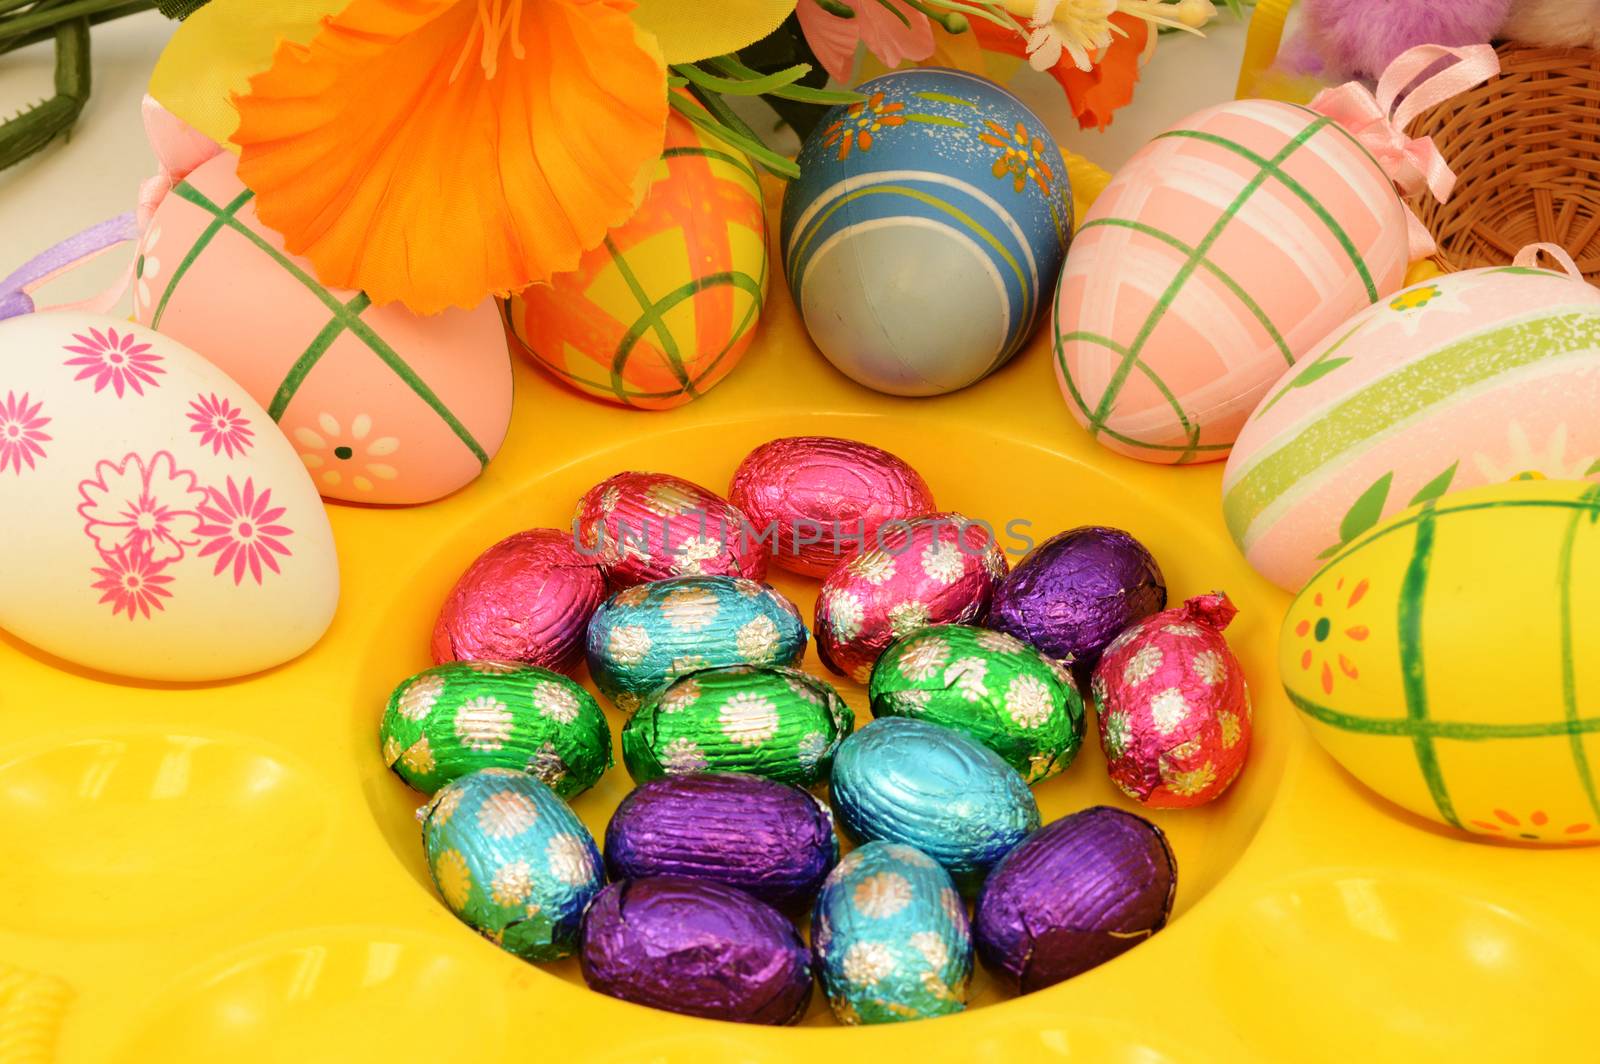 A festive scene of Easter Eggs after decoration.